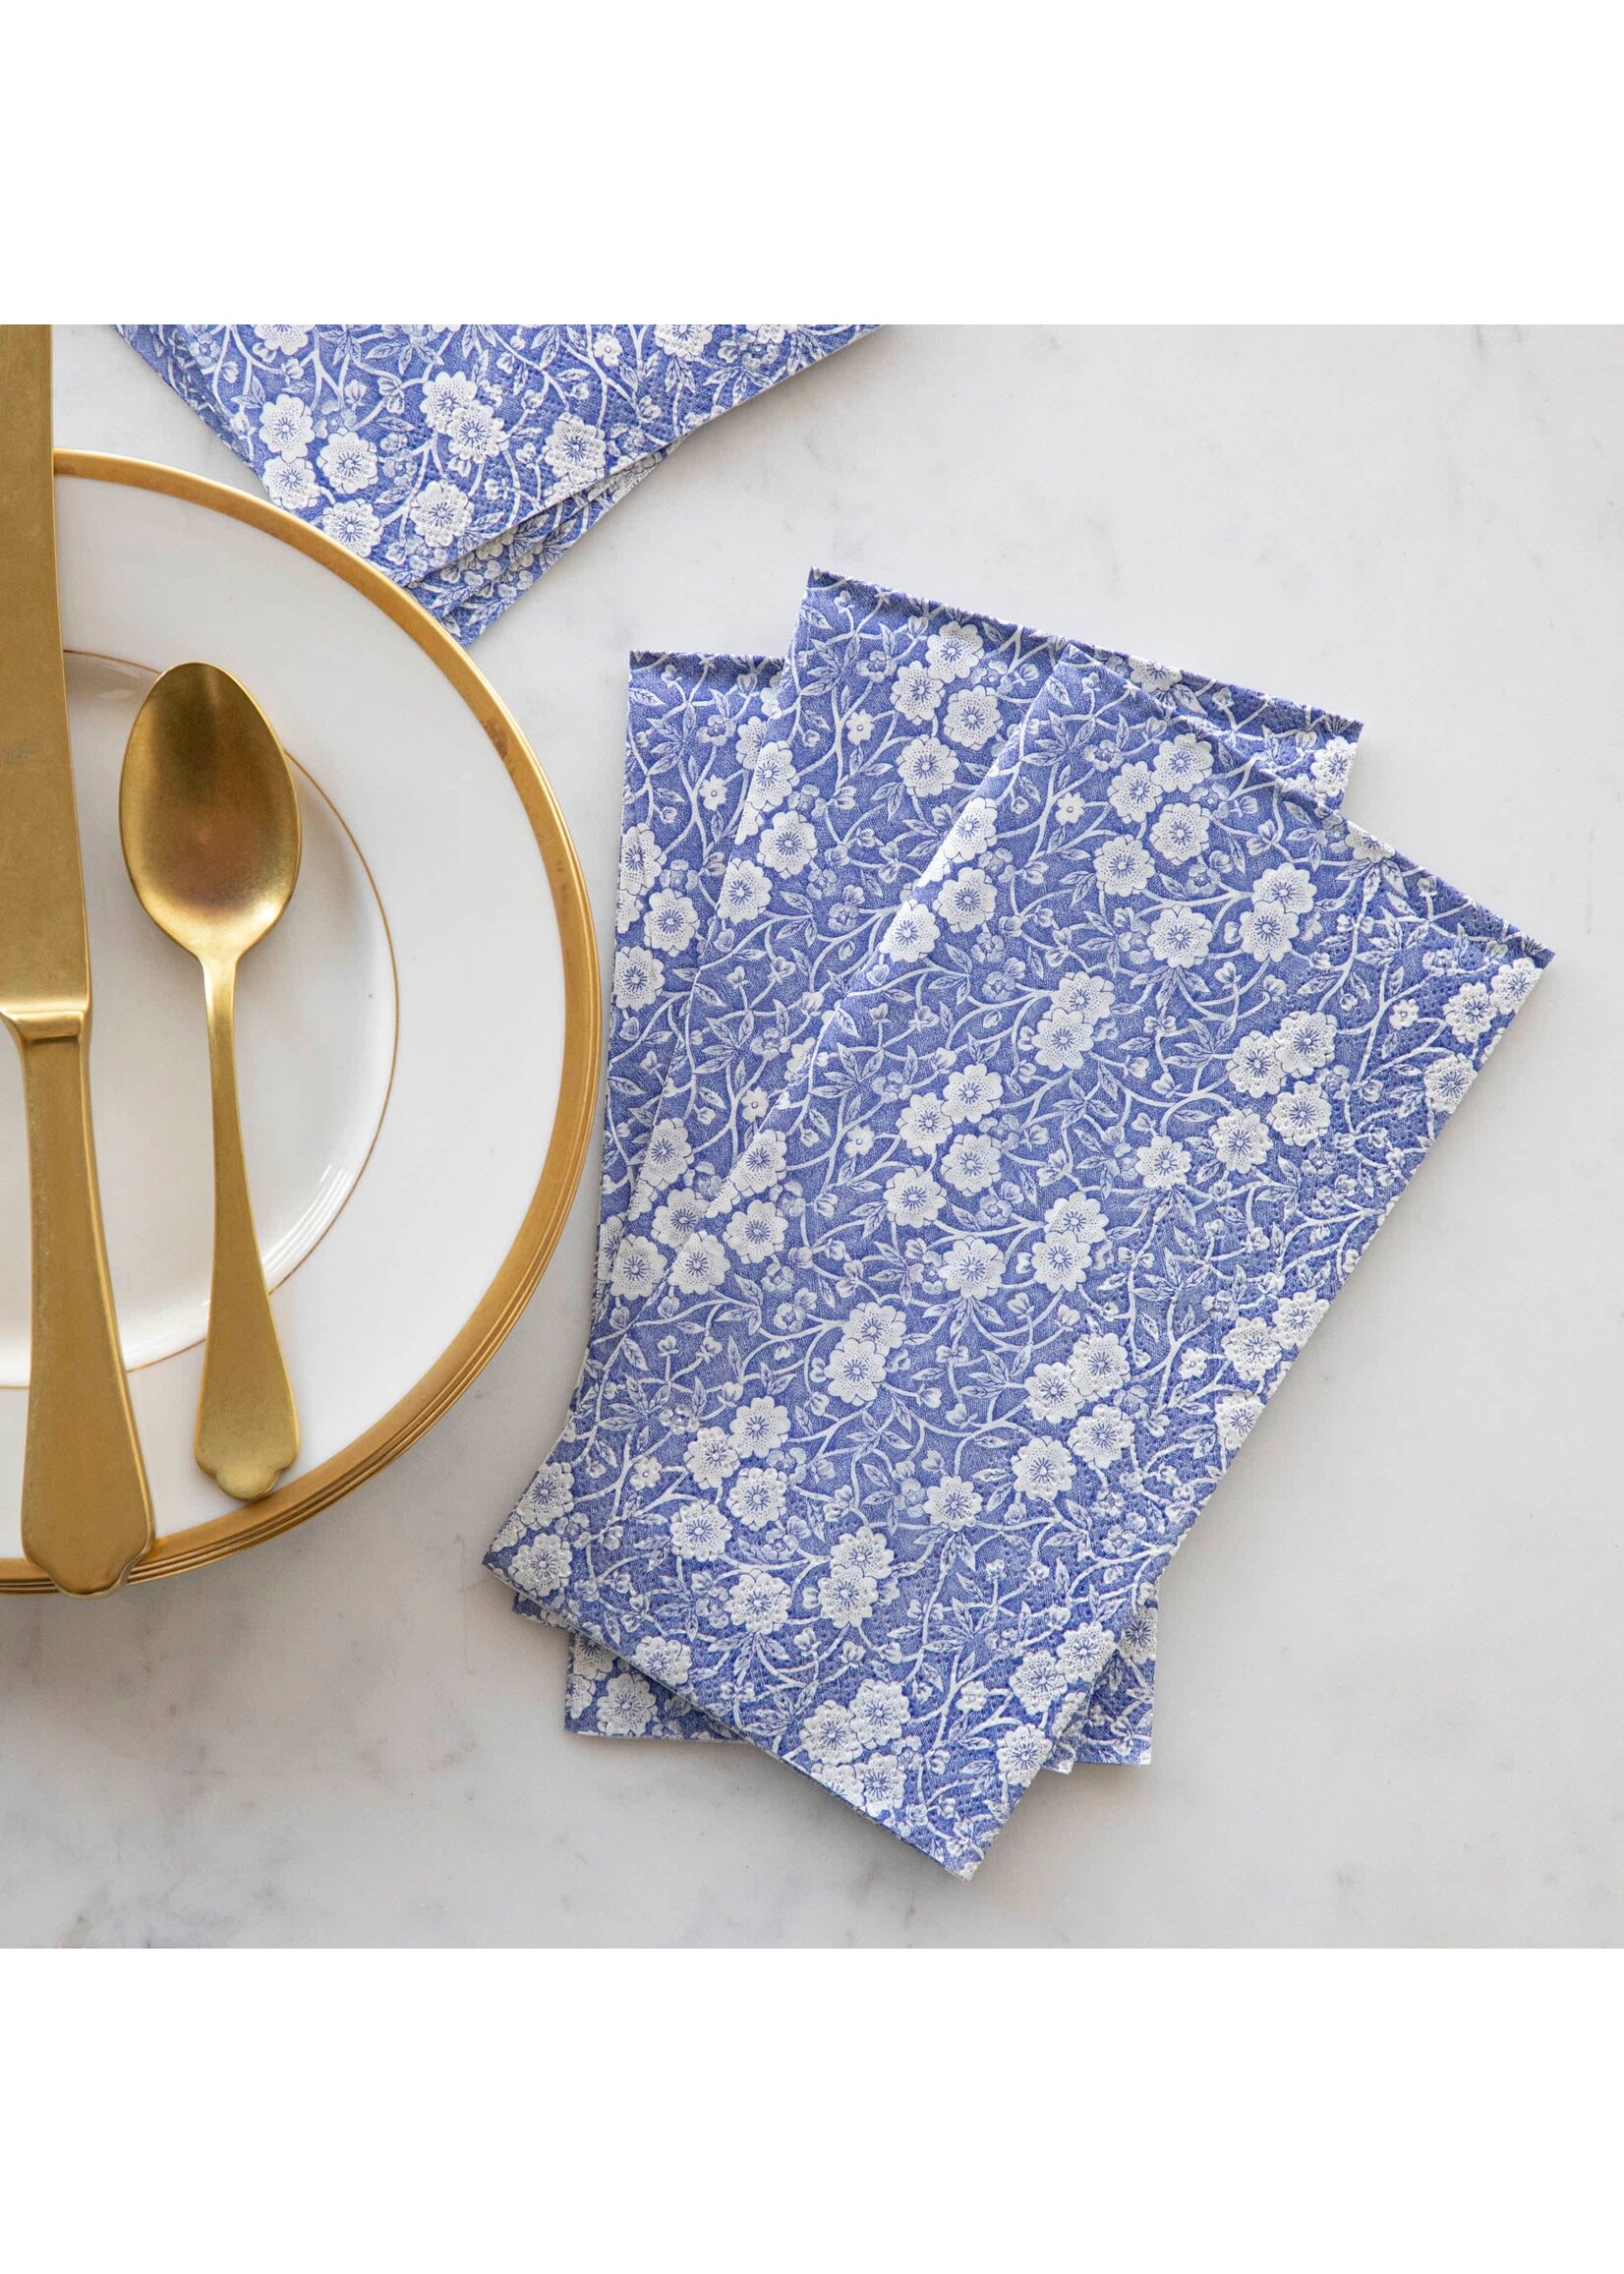 Hester & Cook Paper Guest Napkins - Blue Calico (pack of 16)